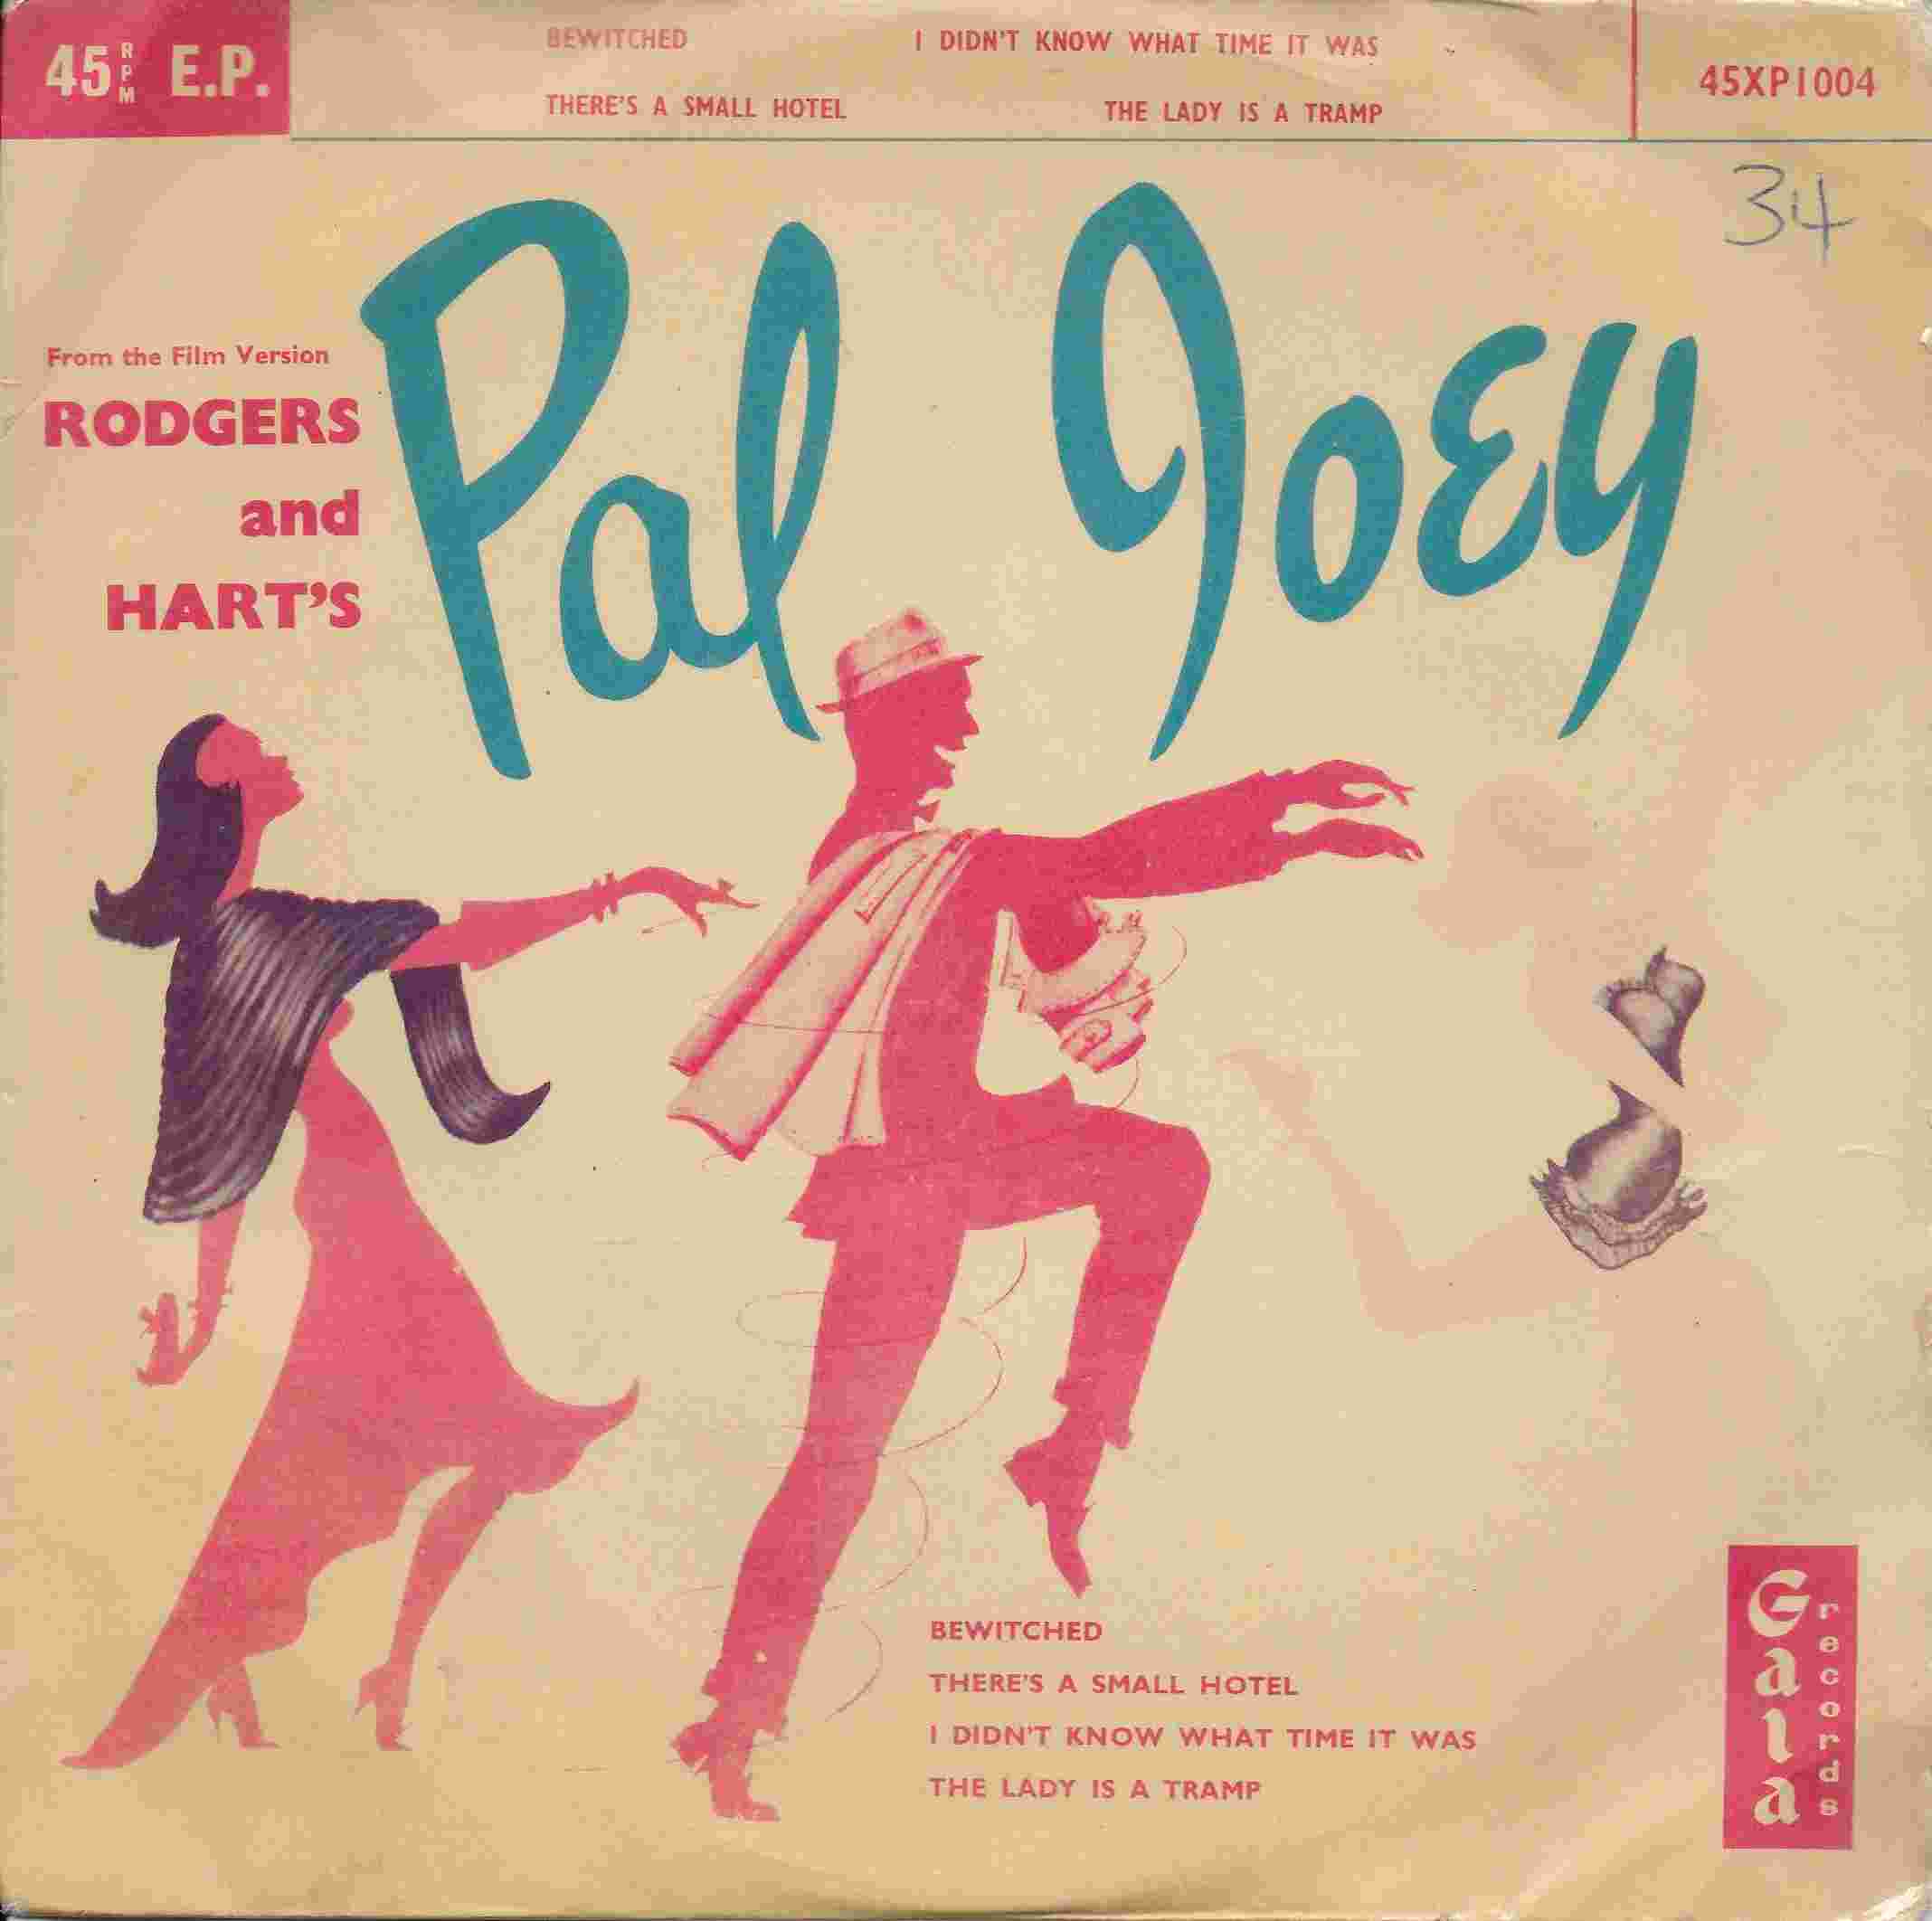 Picture of Pal Joey by artist Rodgers / Hart / Bill St. Clair from ITV, Channel 4 and Channel 5 singles library